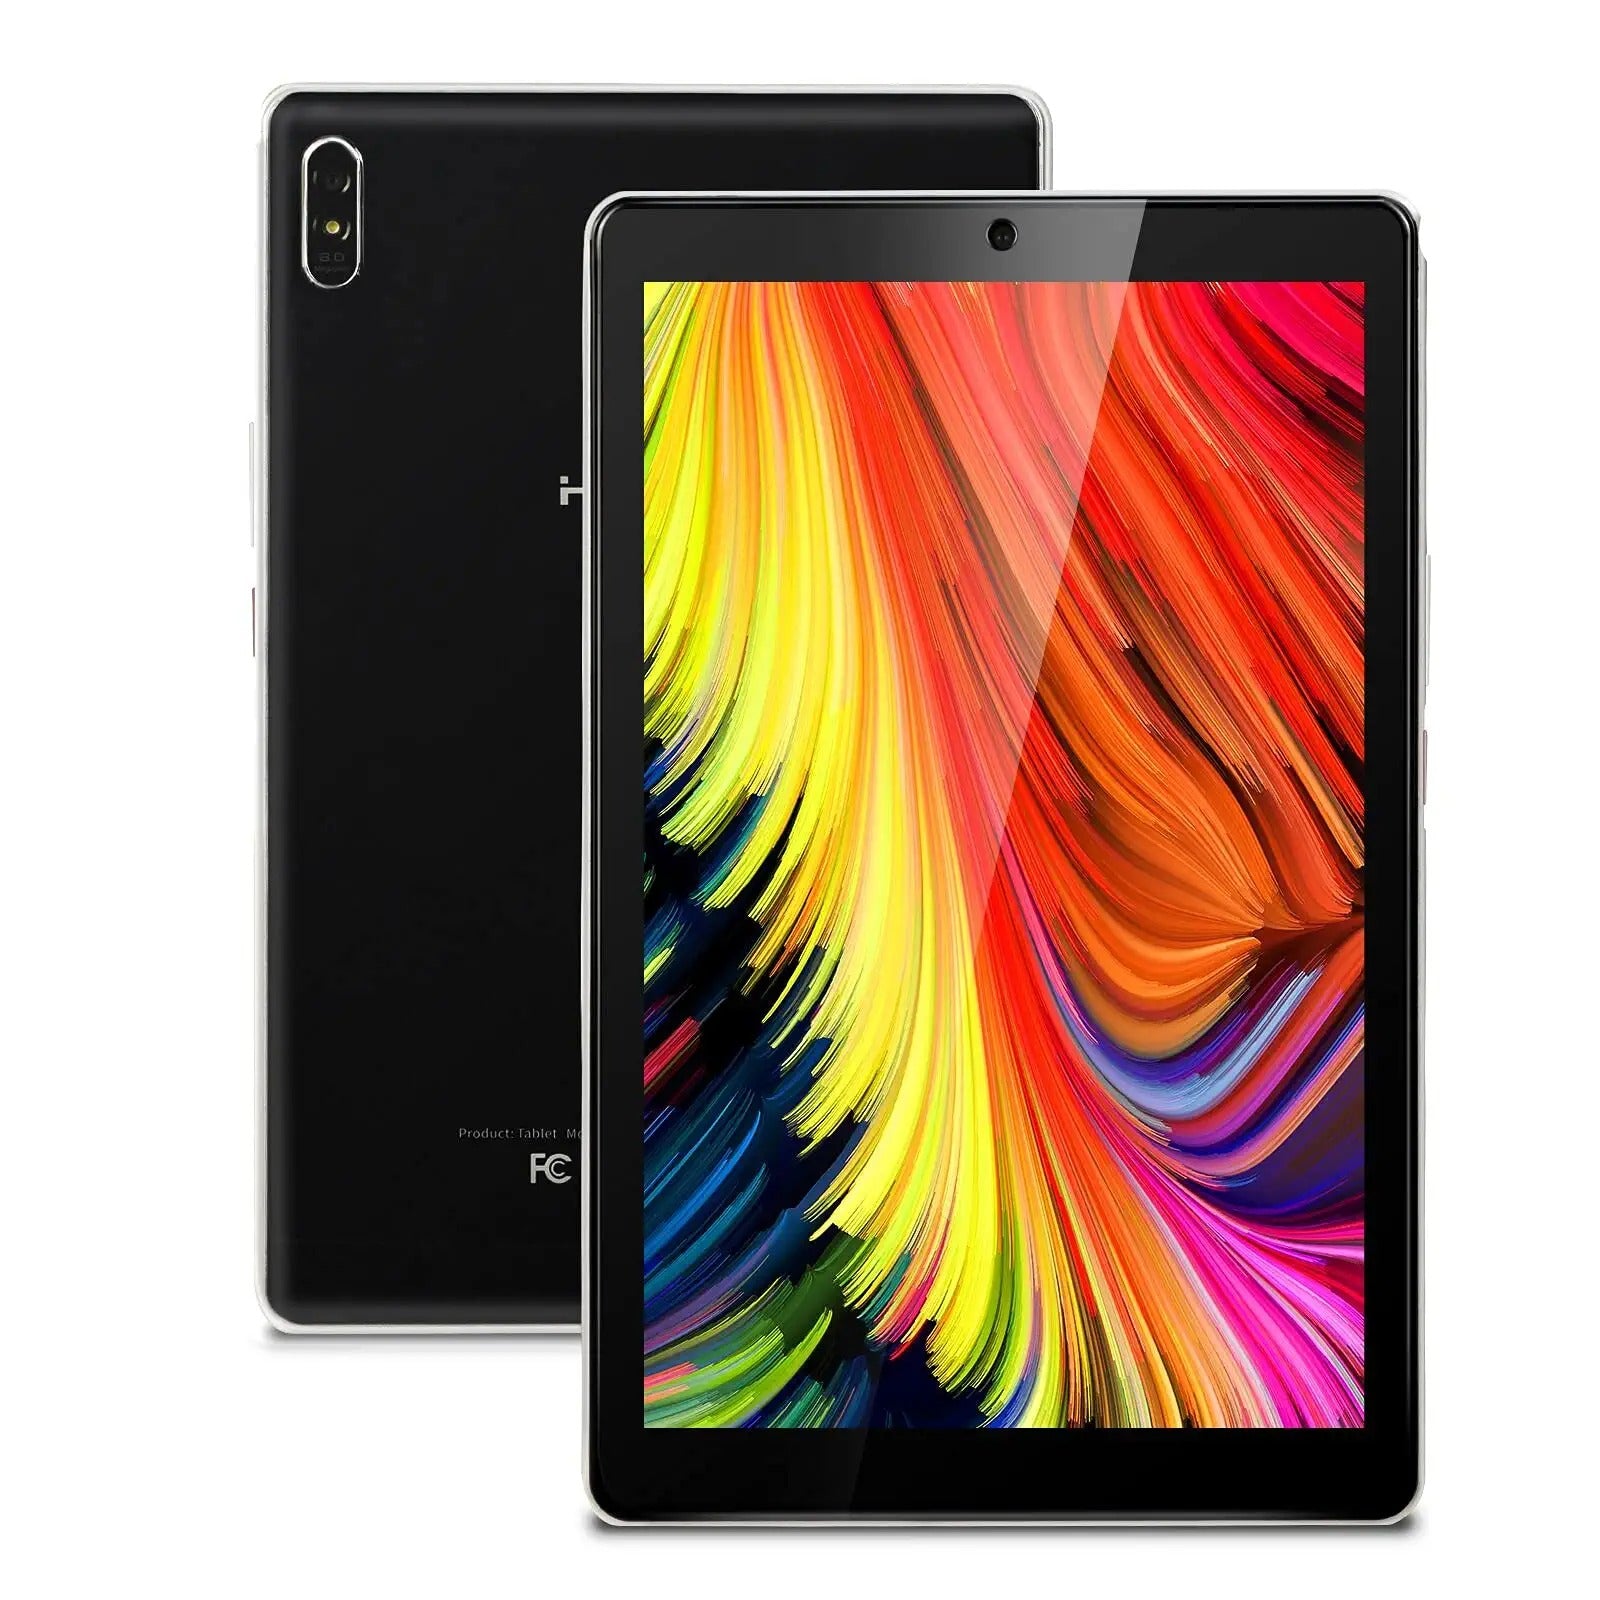 Tablet, 7 inch Android 11 Tablets RAM 2GB+ROM 32GB Quad Core Tablet, IPS  Screen, 5.0 MP Camera, Wi-Fi, Bluetooth, GPS, FM Tablet PC Black